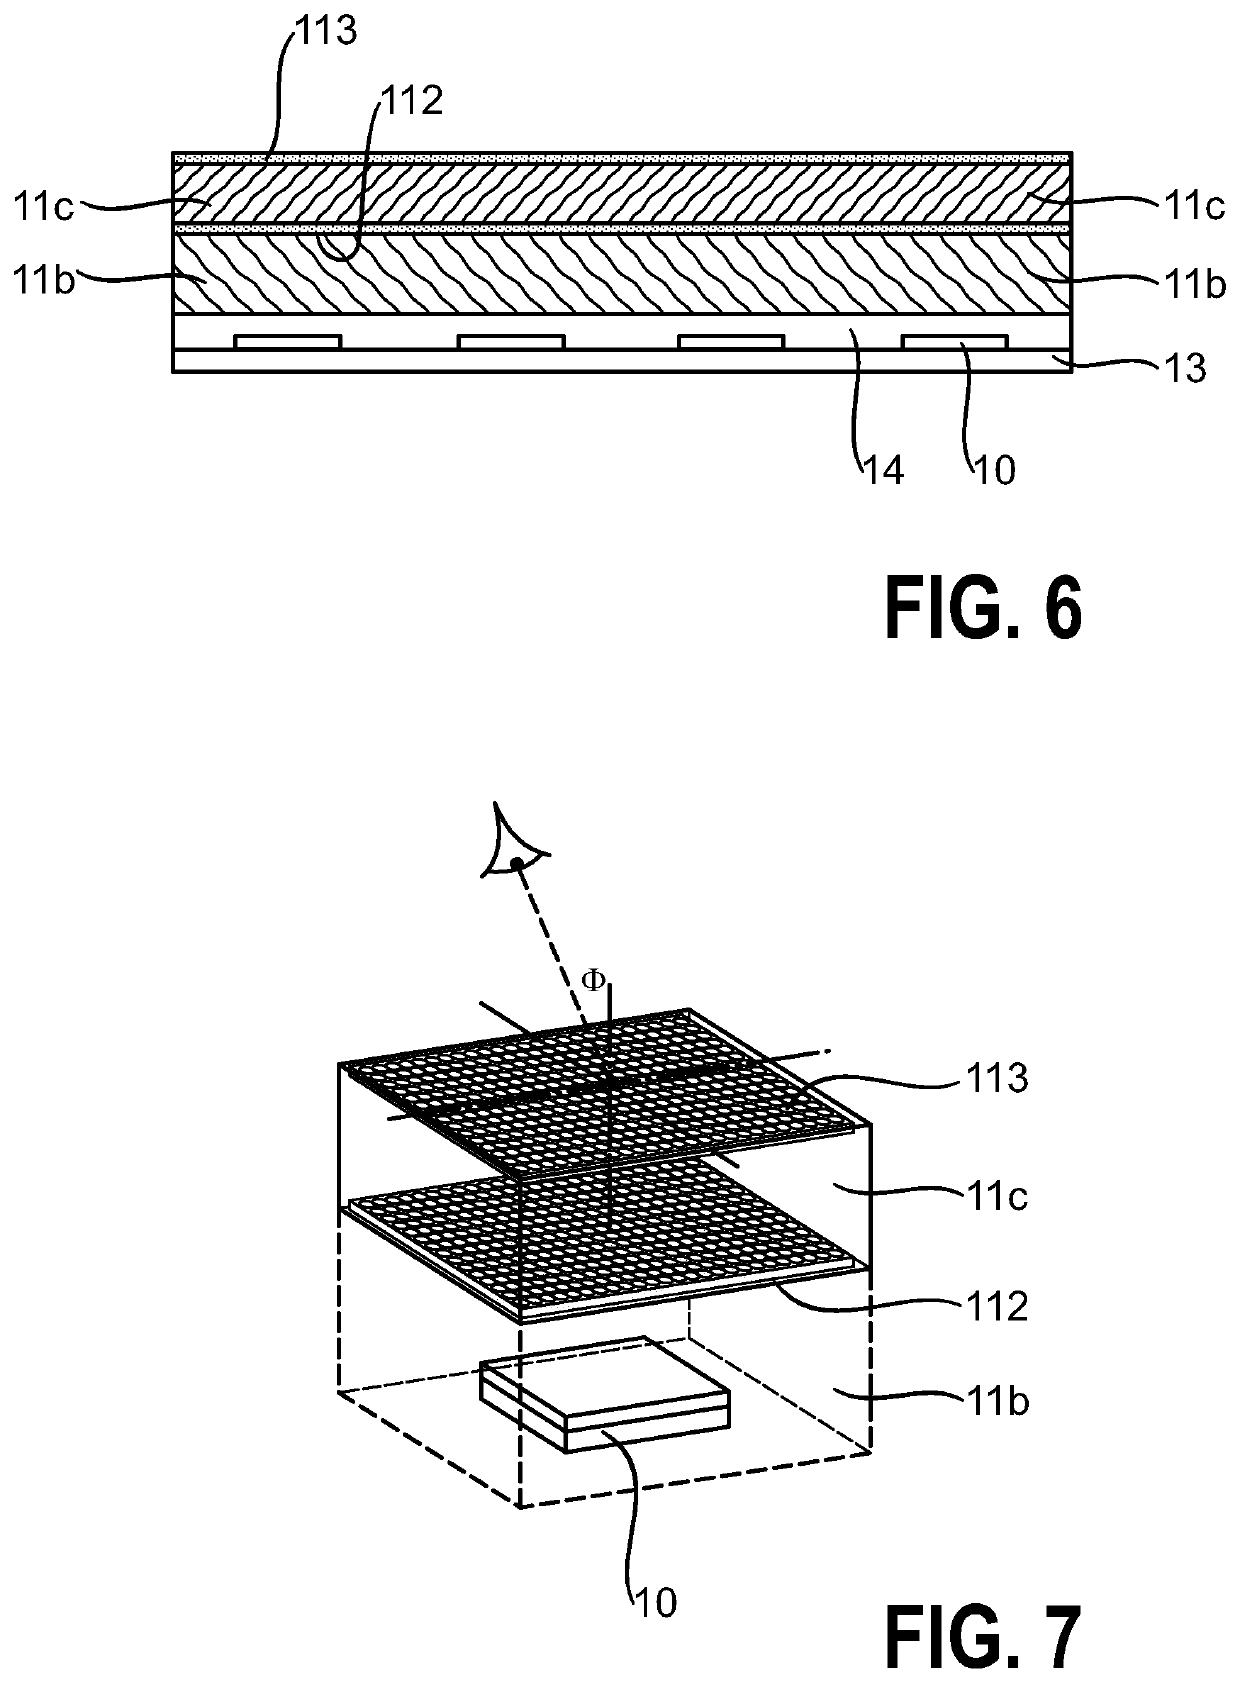 Method of manufacturing an LED module